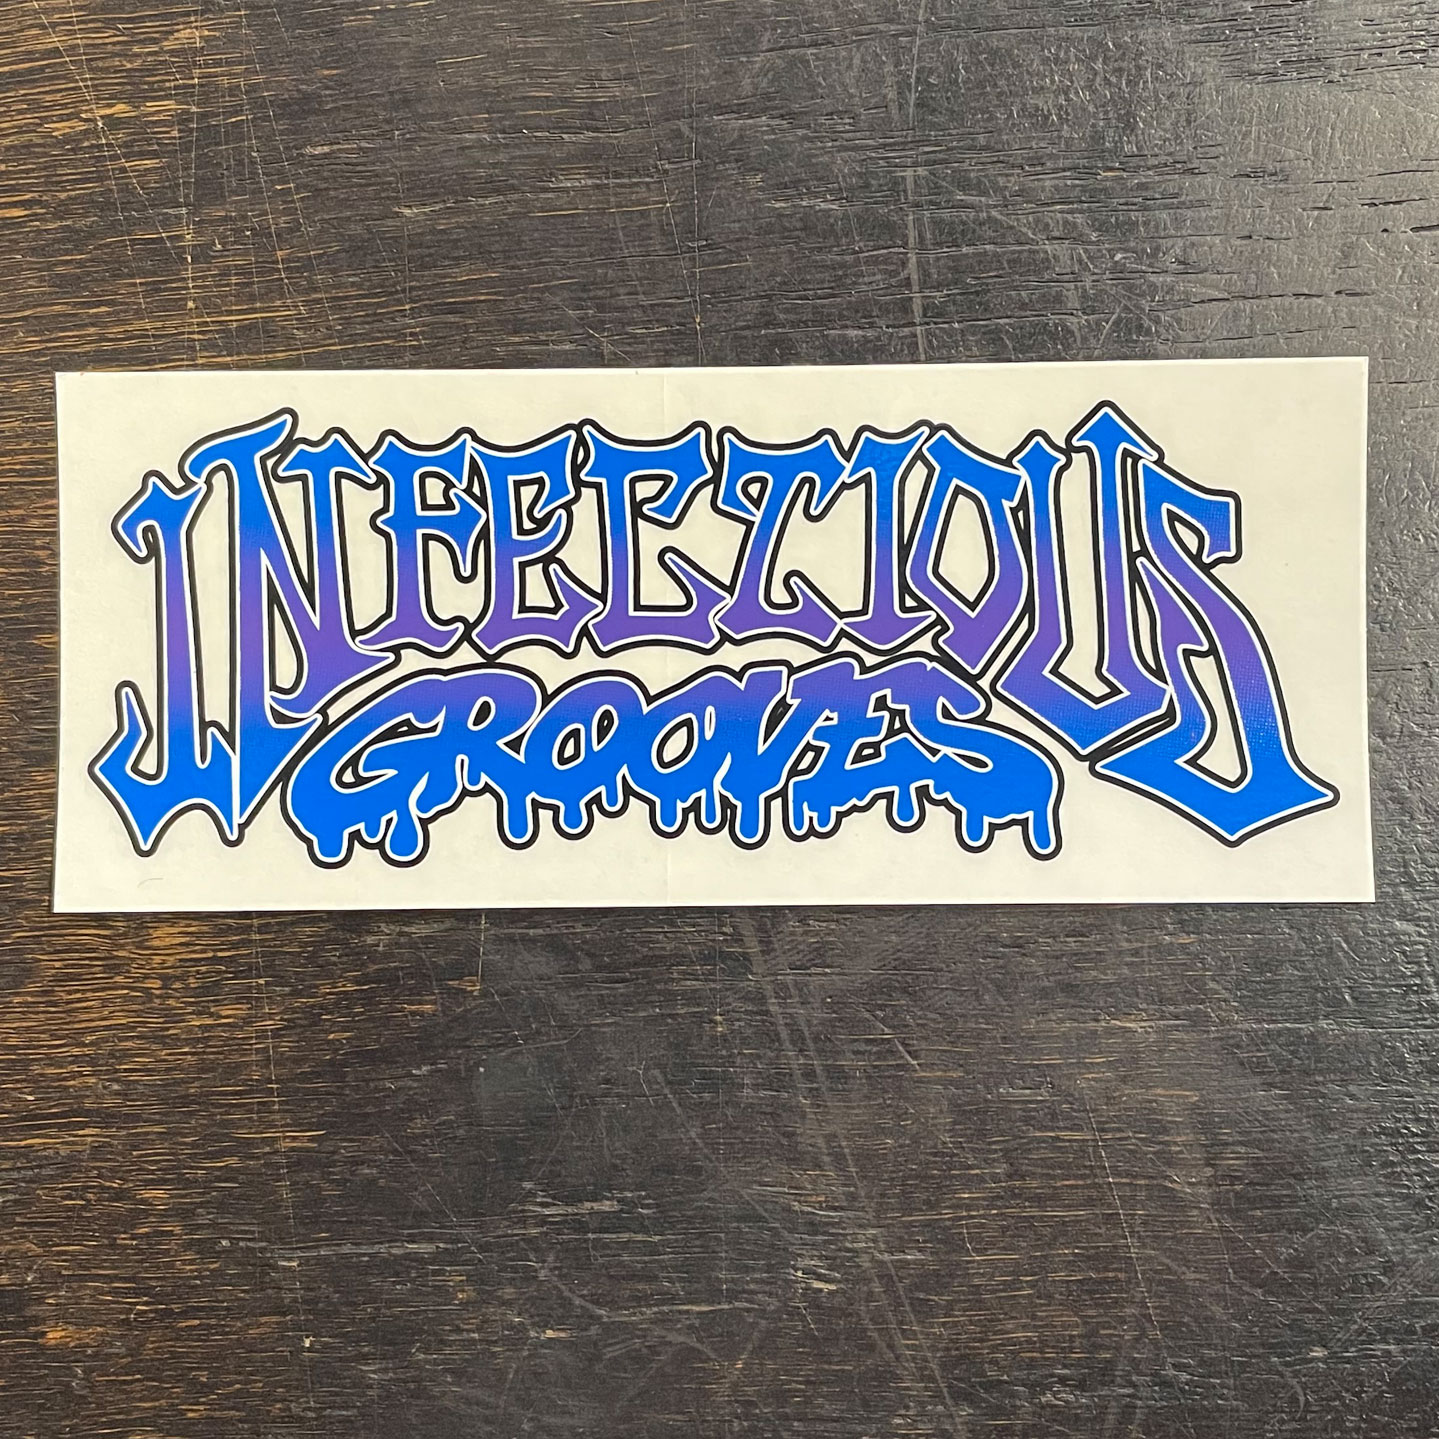 INFECTIOUS GROOVES ステッカー LOGO